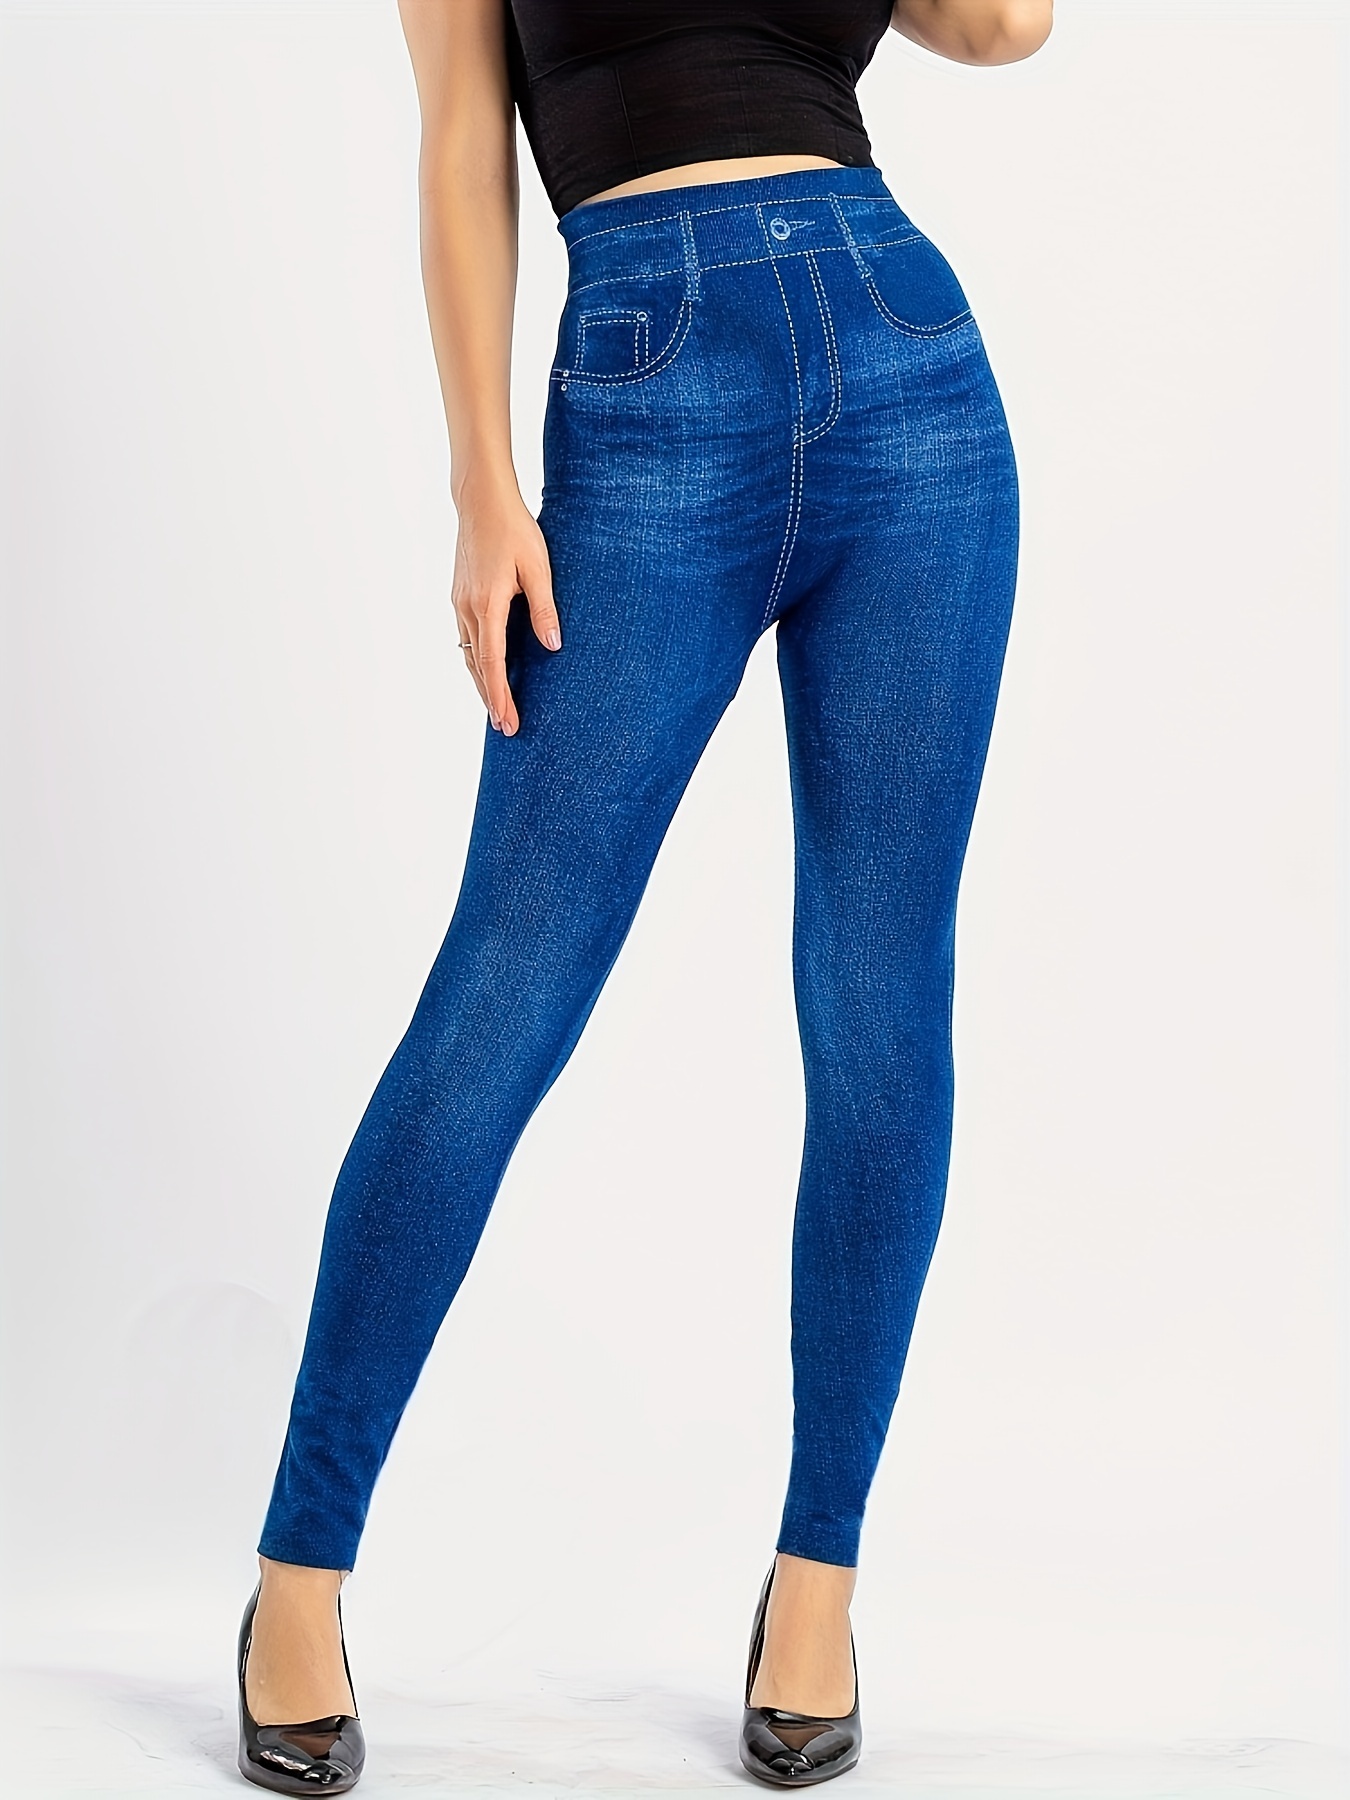 Jeggings and Skinny Jeans  Men's & Women's Jeans, Clothes